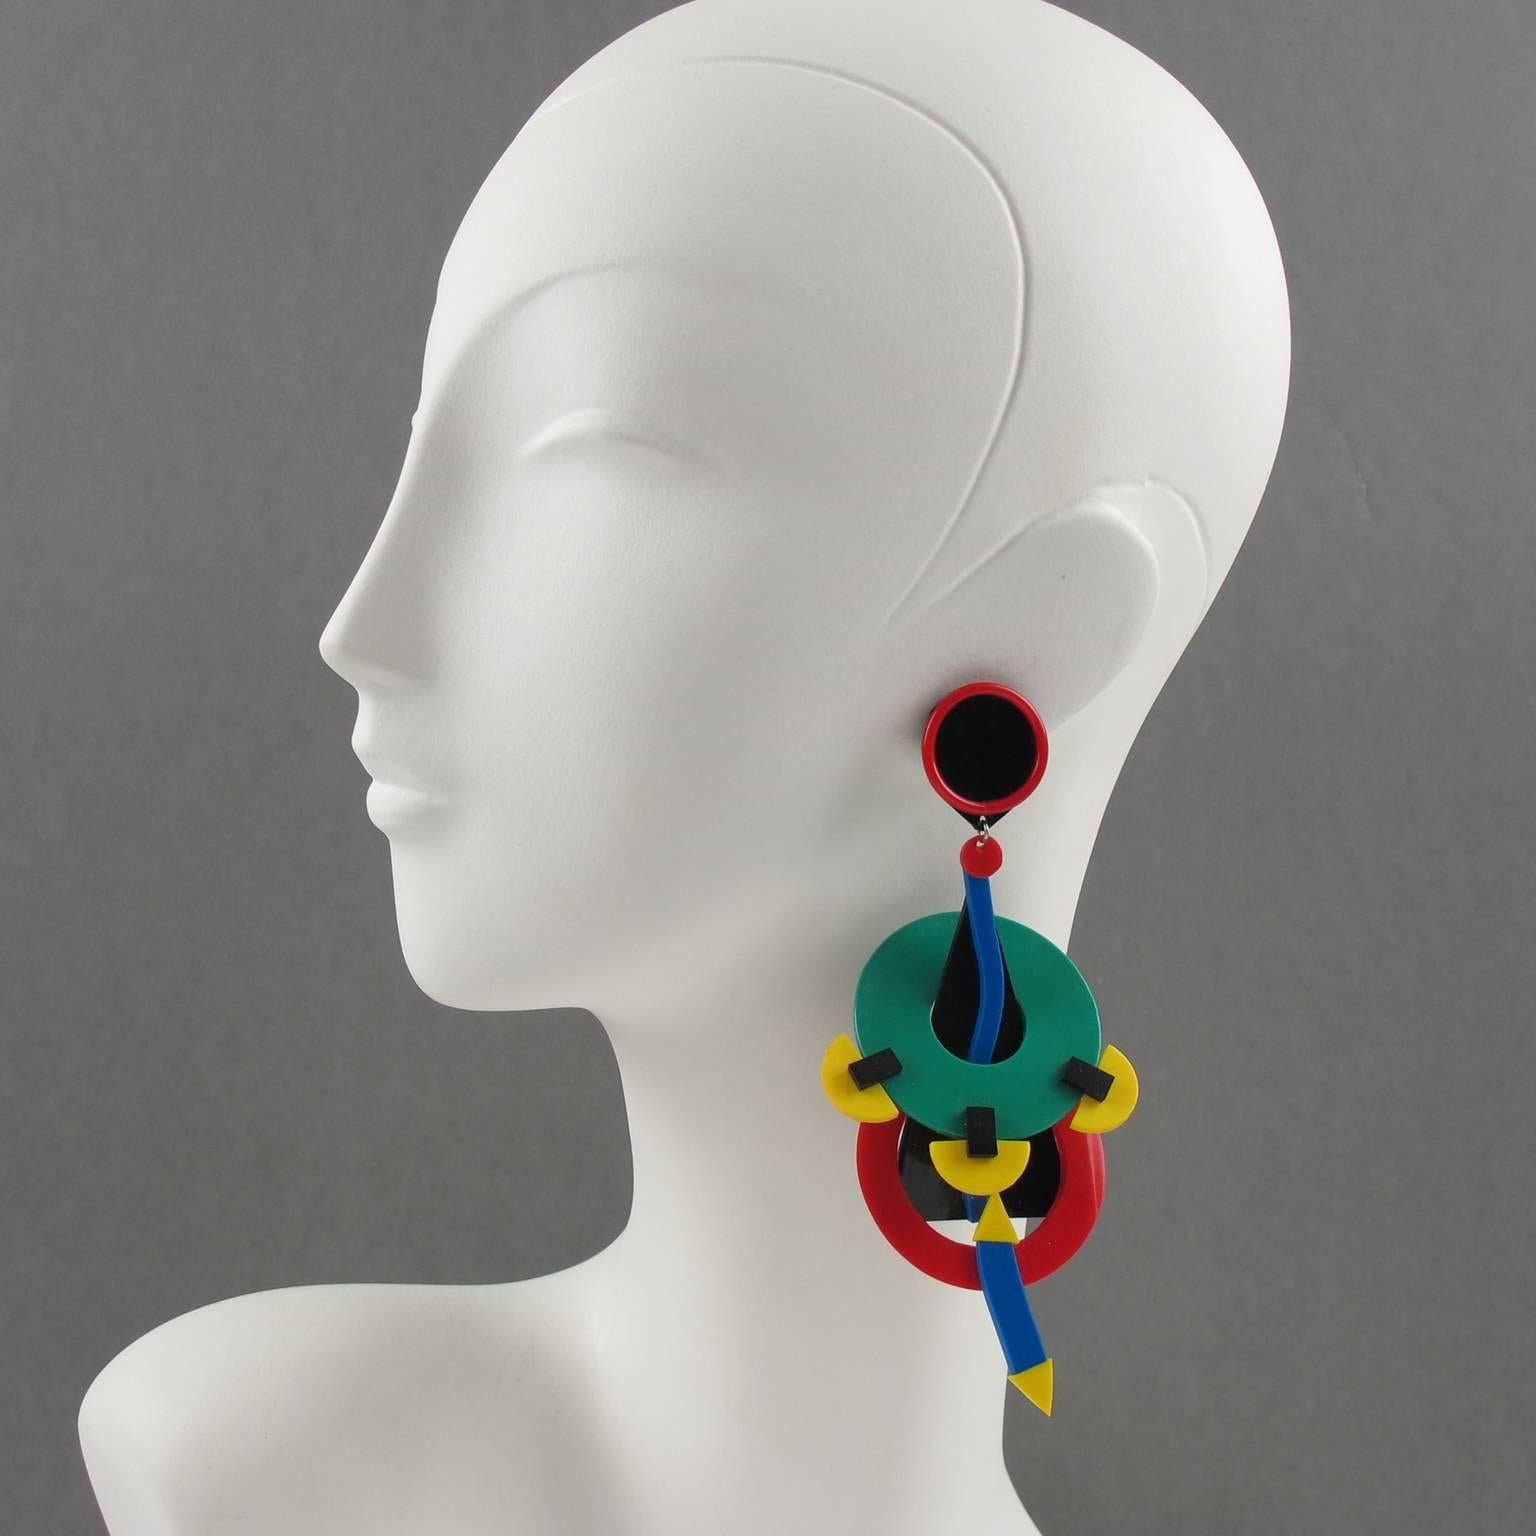 Rare vintage Italian designer Memphis Studio oversized clip on earrings. Featuring colored rubber in geometric and asymmetric carved shape. Lovely chandelier shape with dangling design. Assorted colors of black, red, yellow, green, orange and